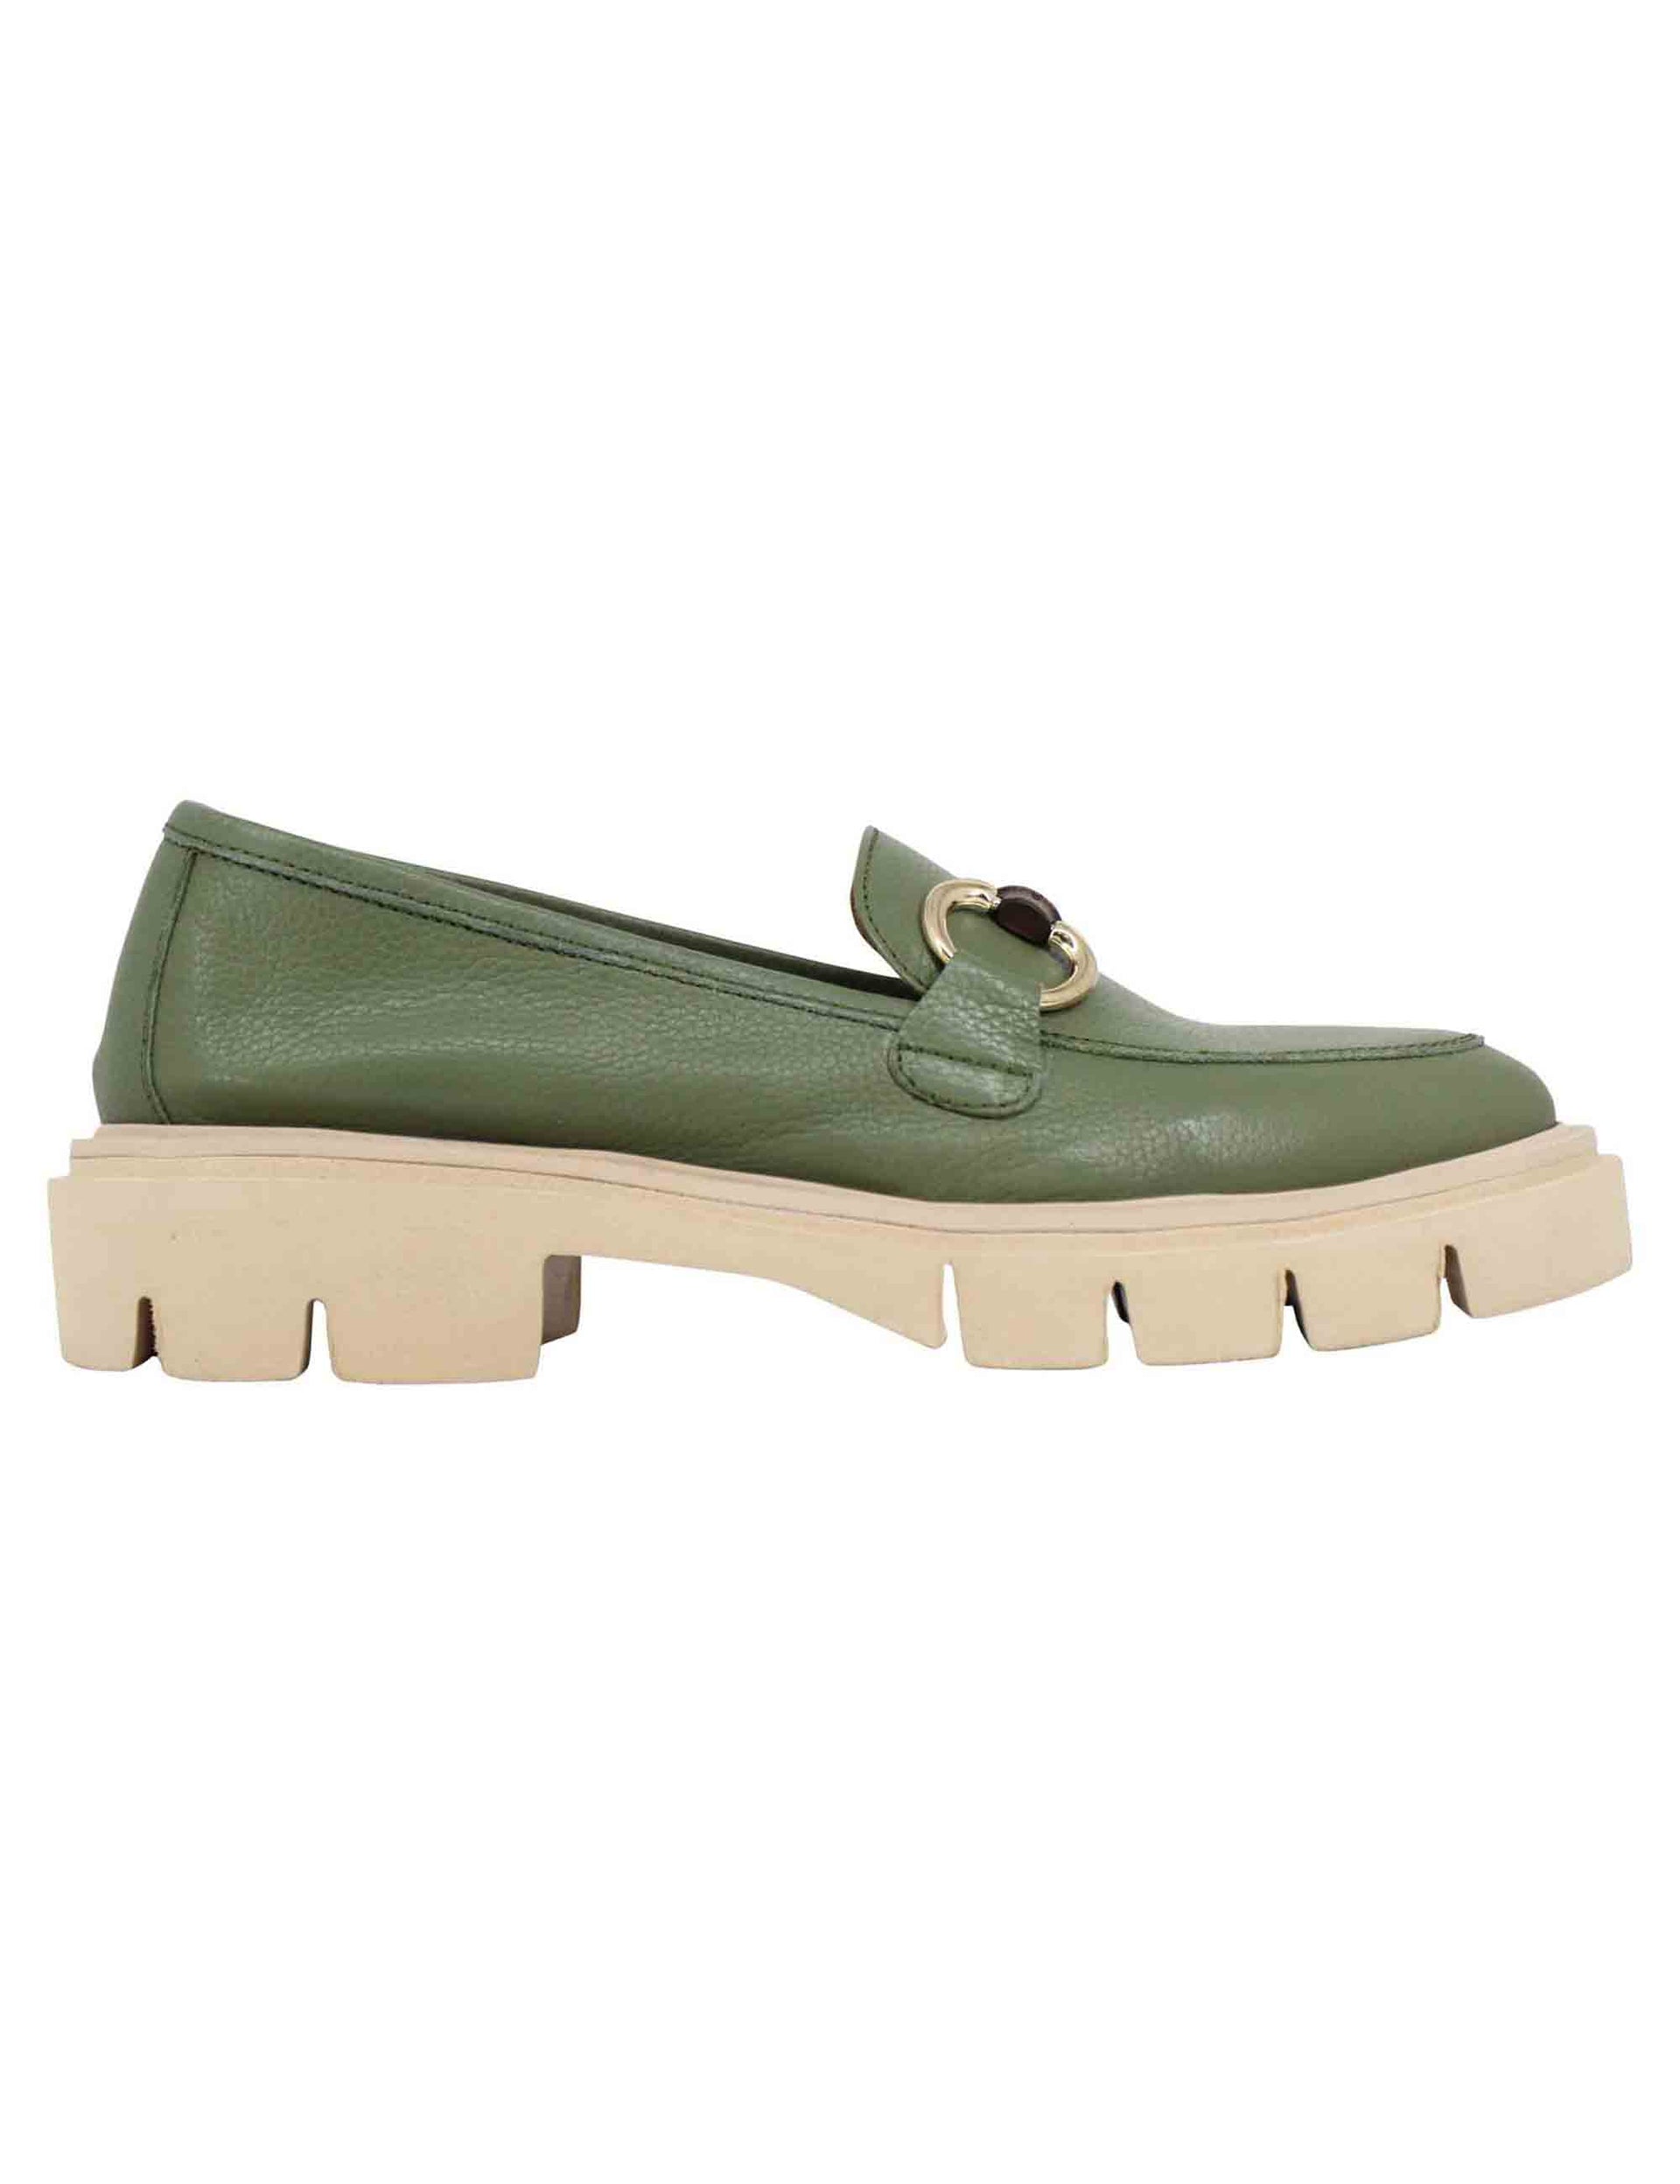 Women's green leather moccasins with light lug sole